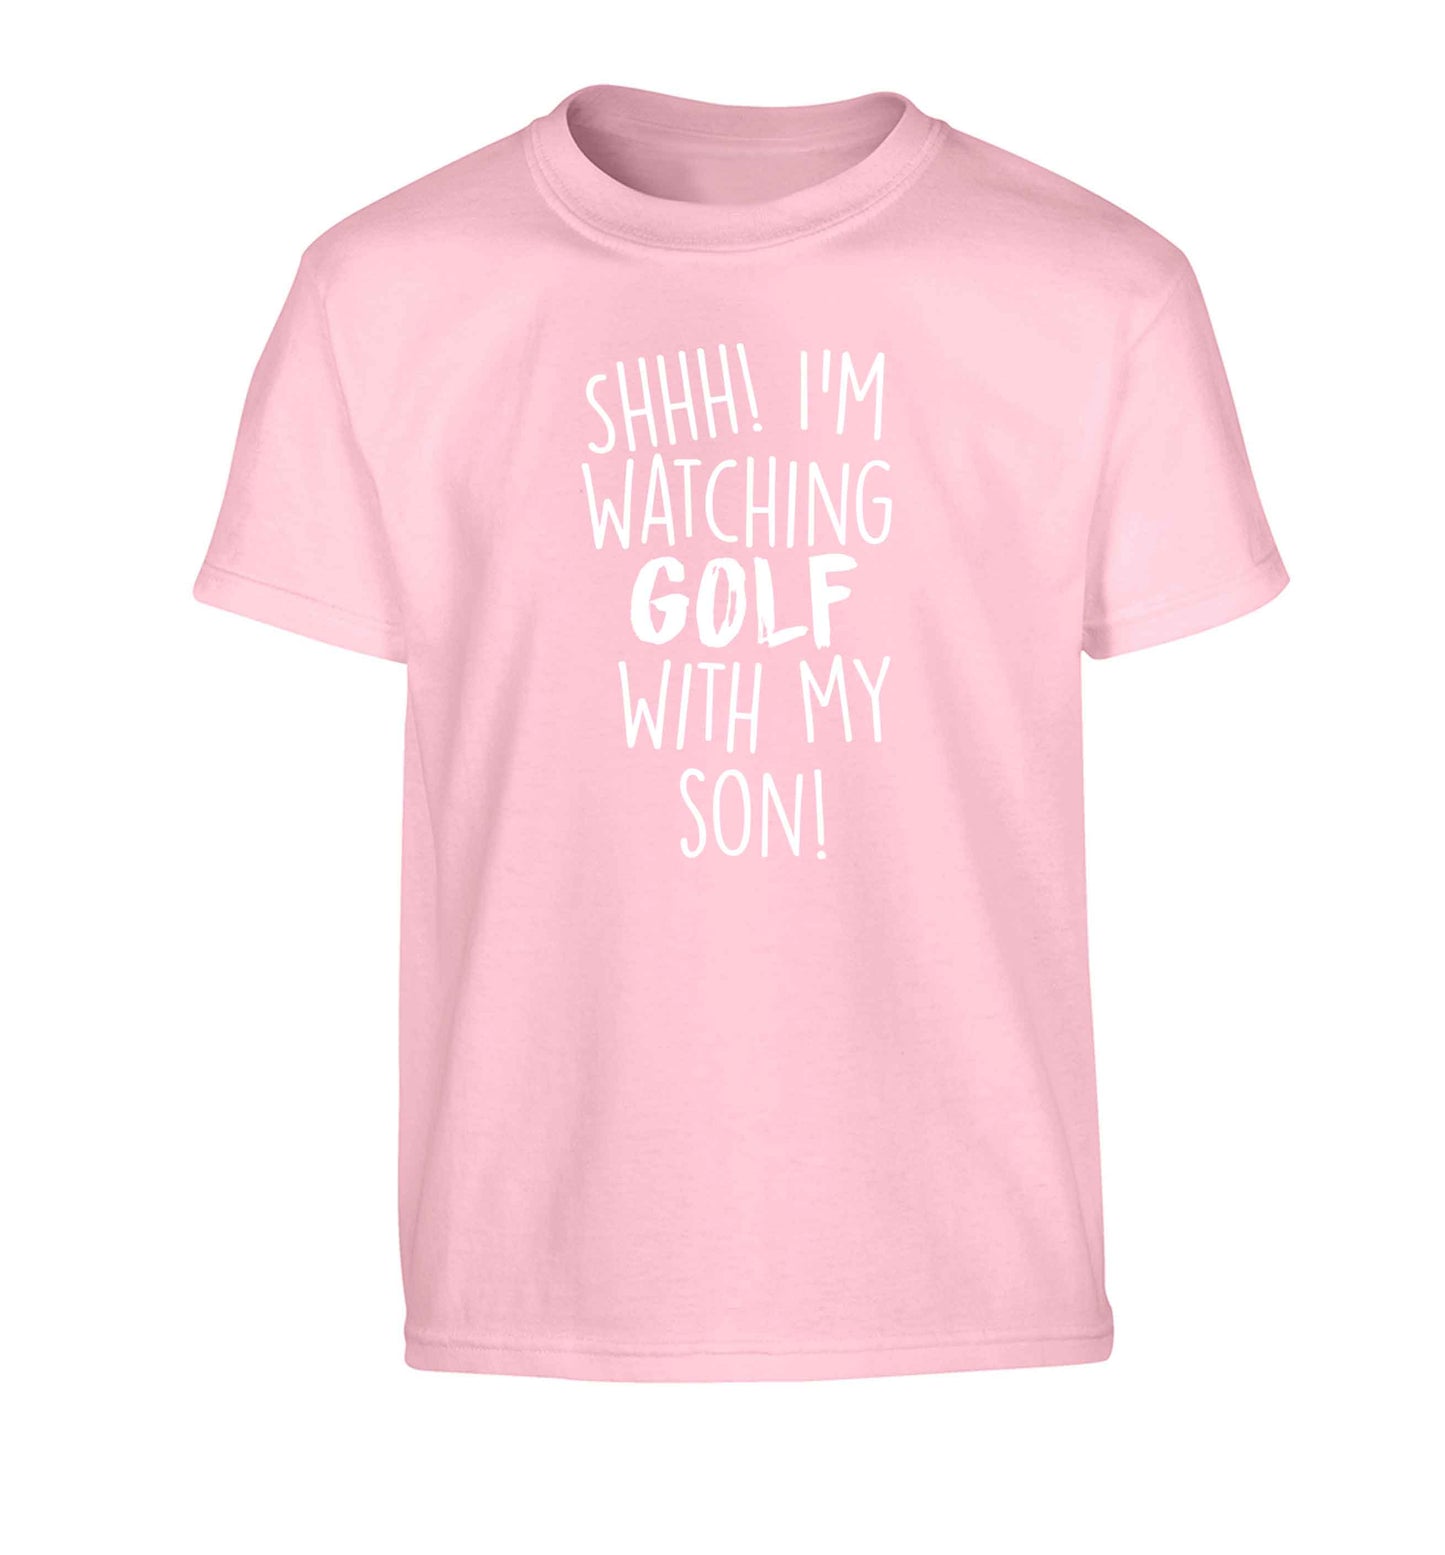 Shh I'm watching golf with my son Children's light pink Tshirt 12-13 Years